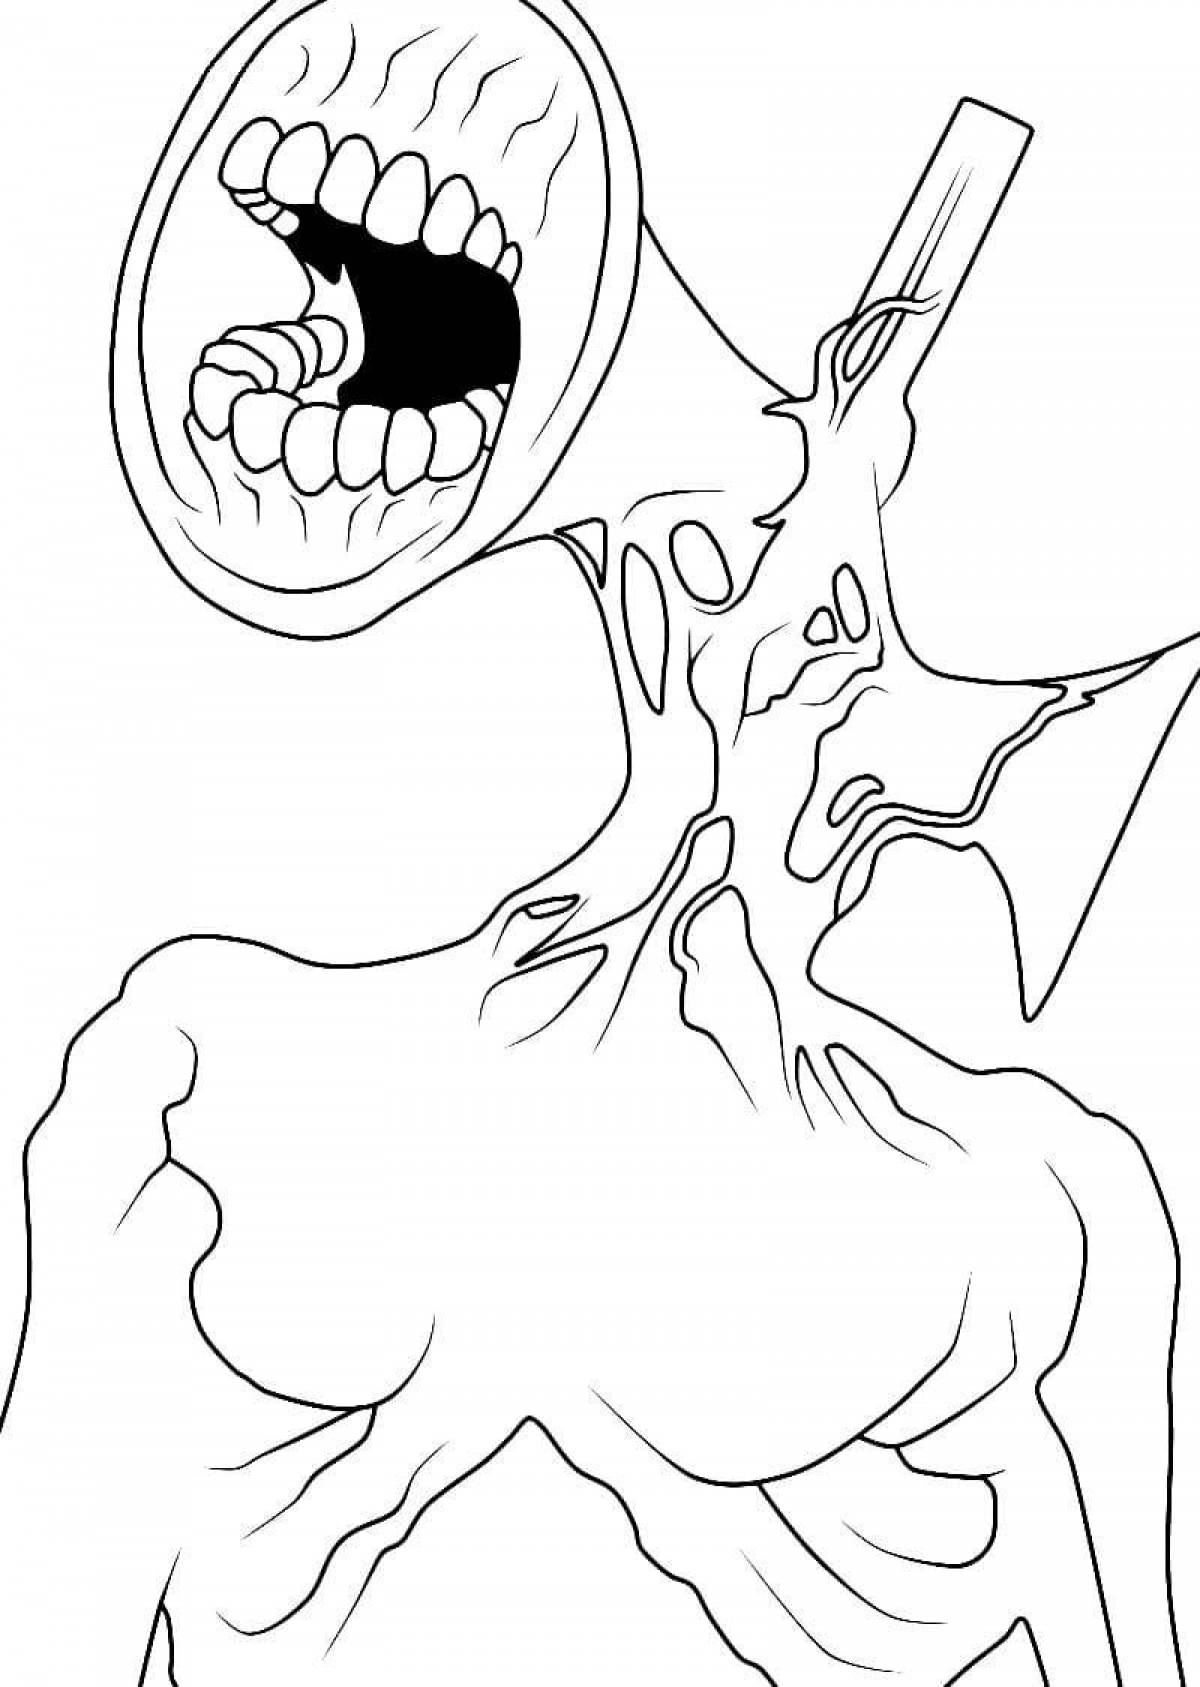 Awesome siren head coloring page